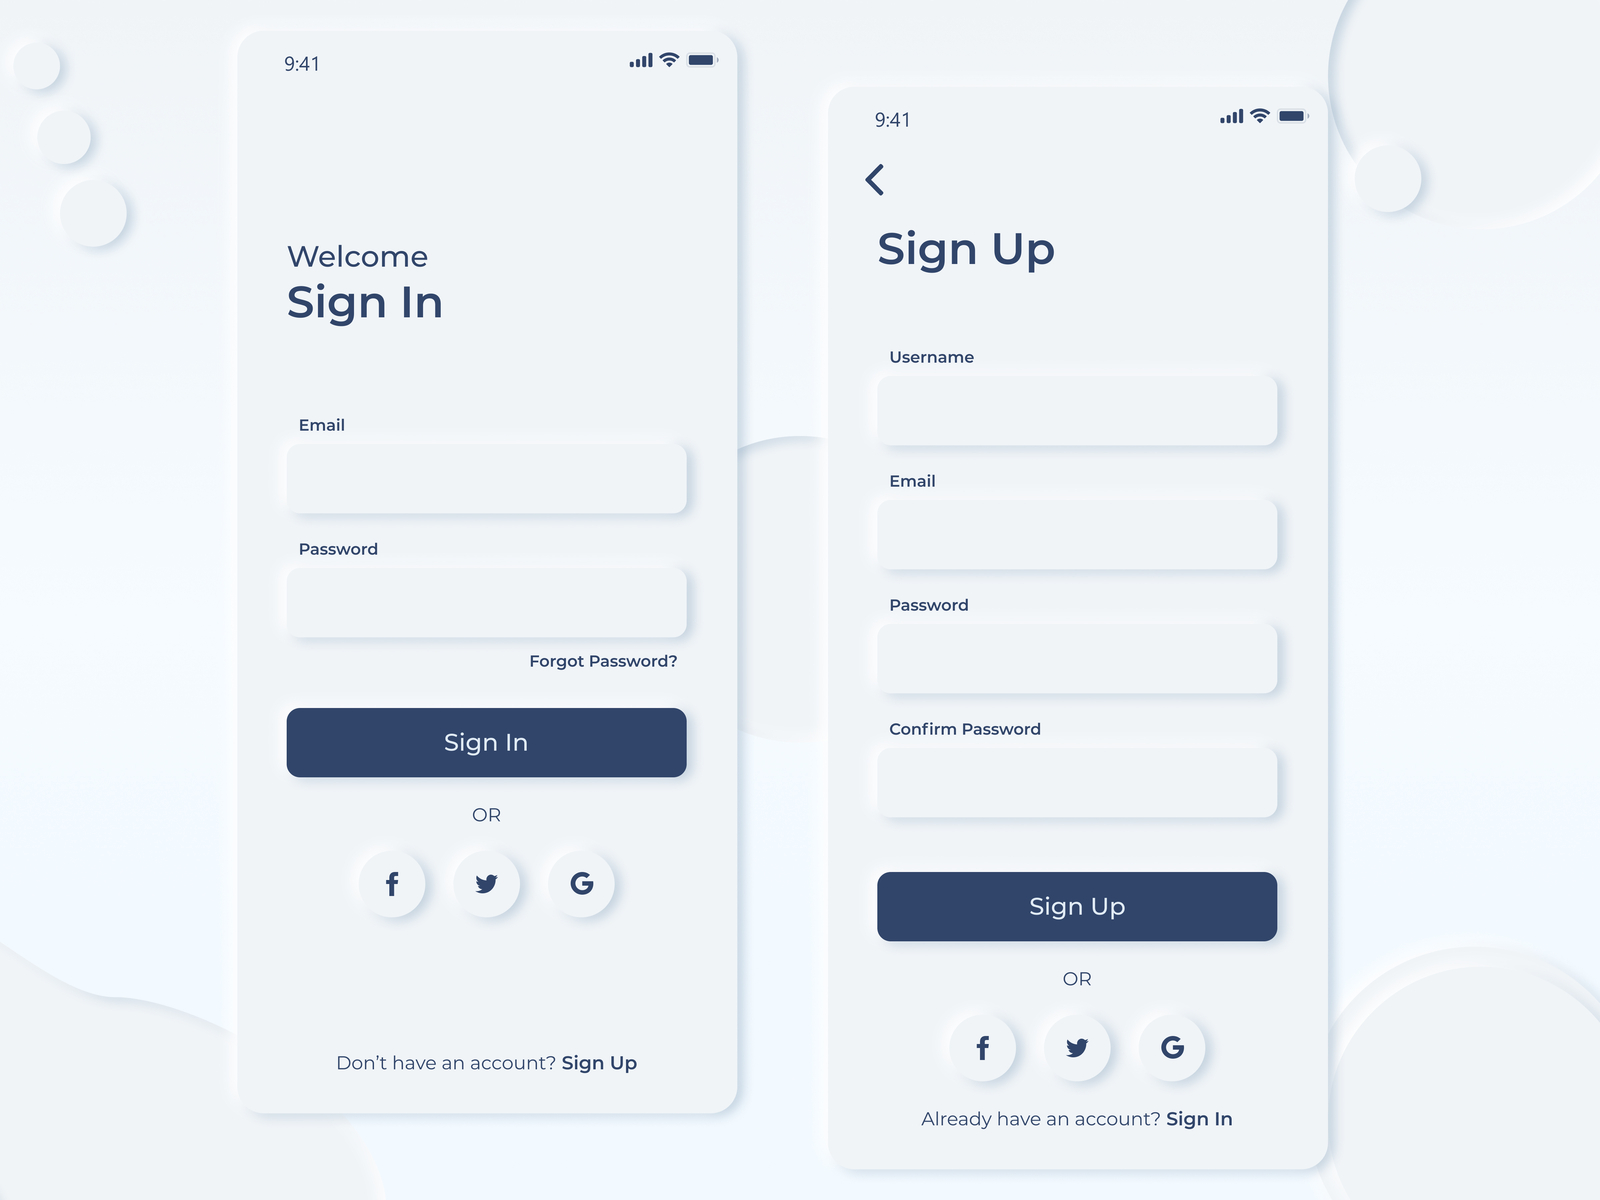 sign up and sign in neomorphism ui by Neser_U. on Dribbble